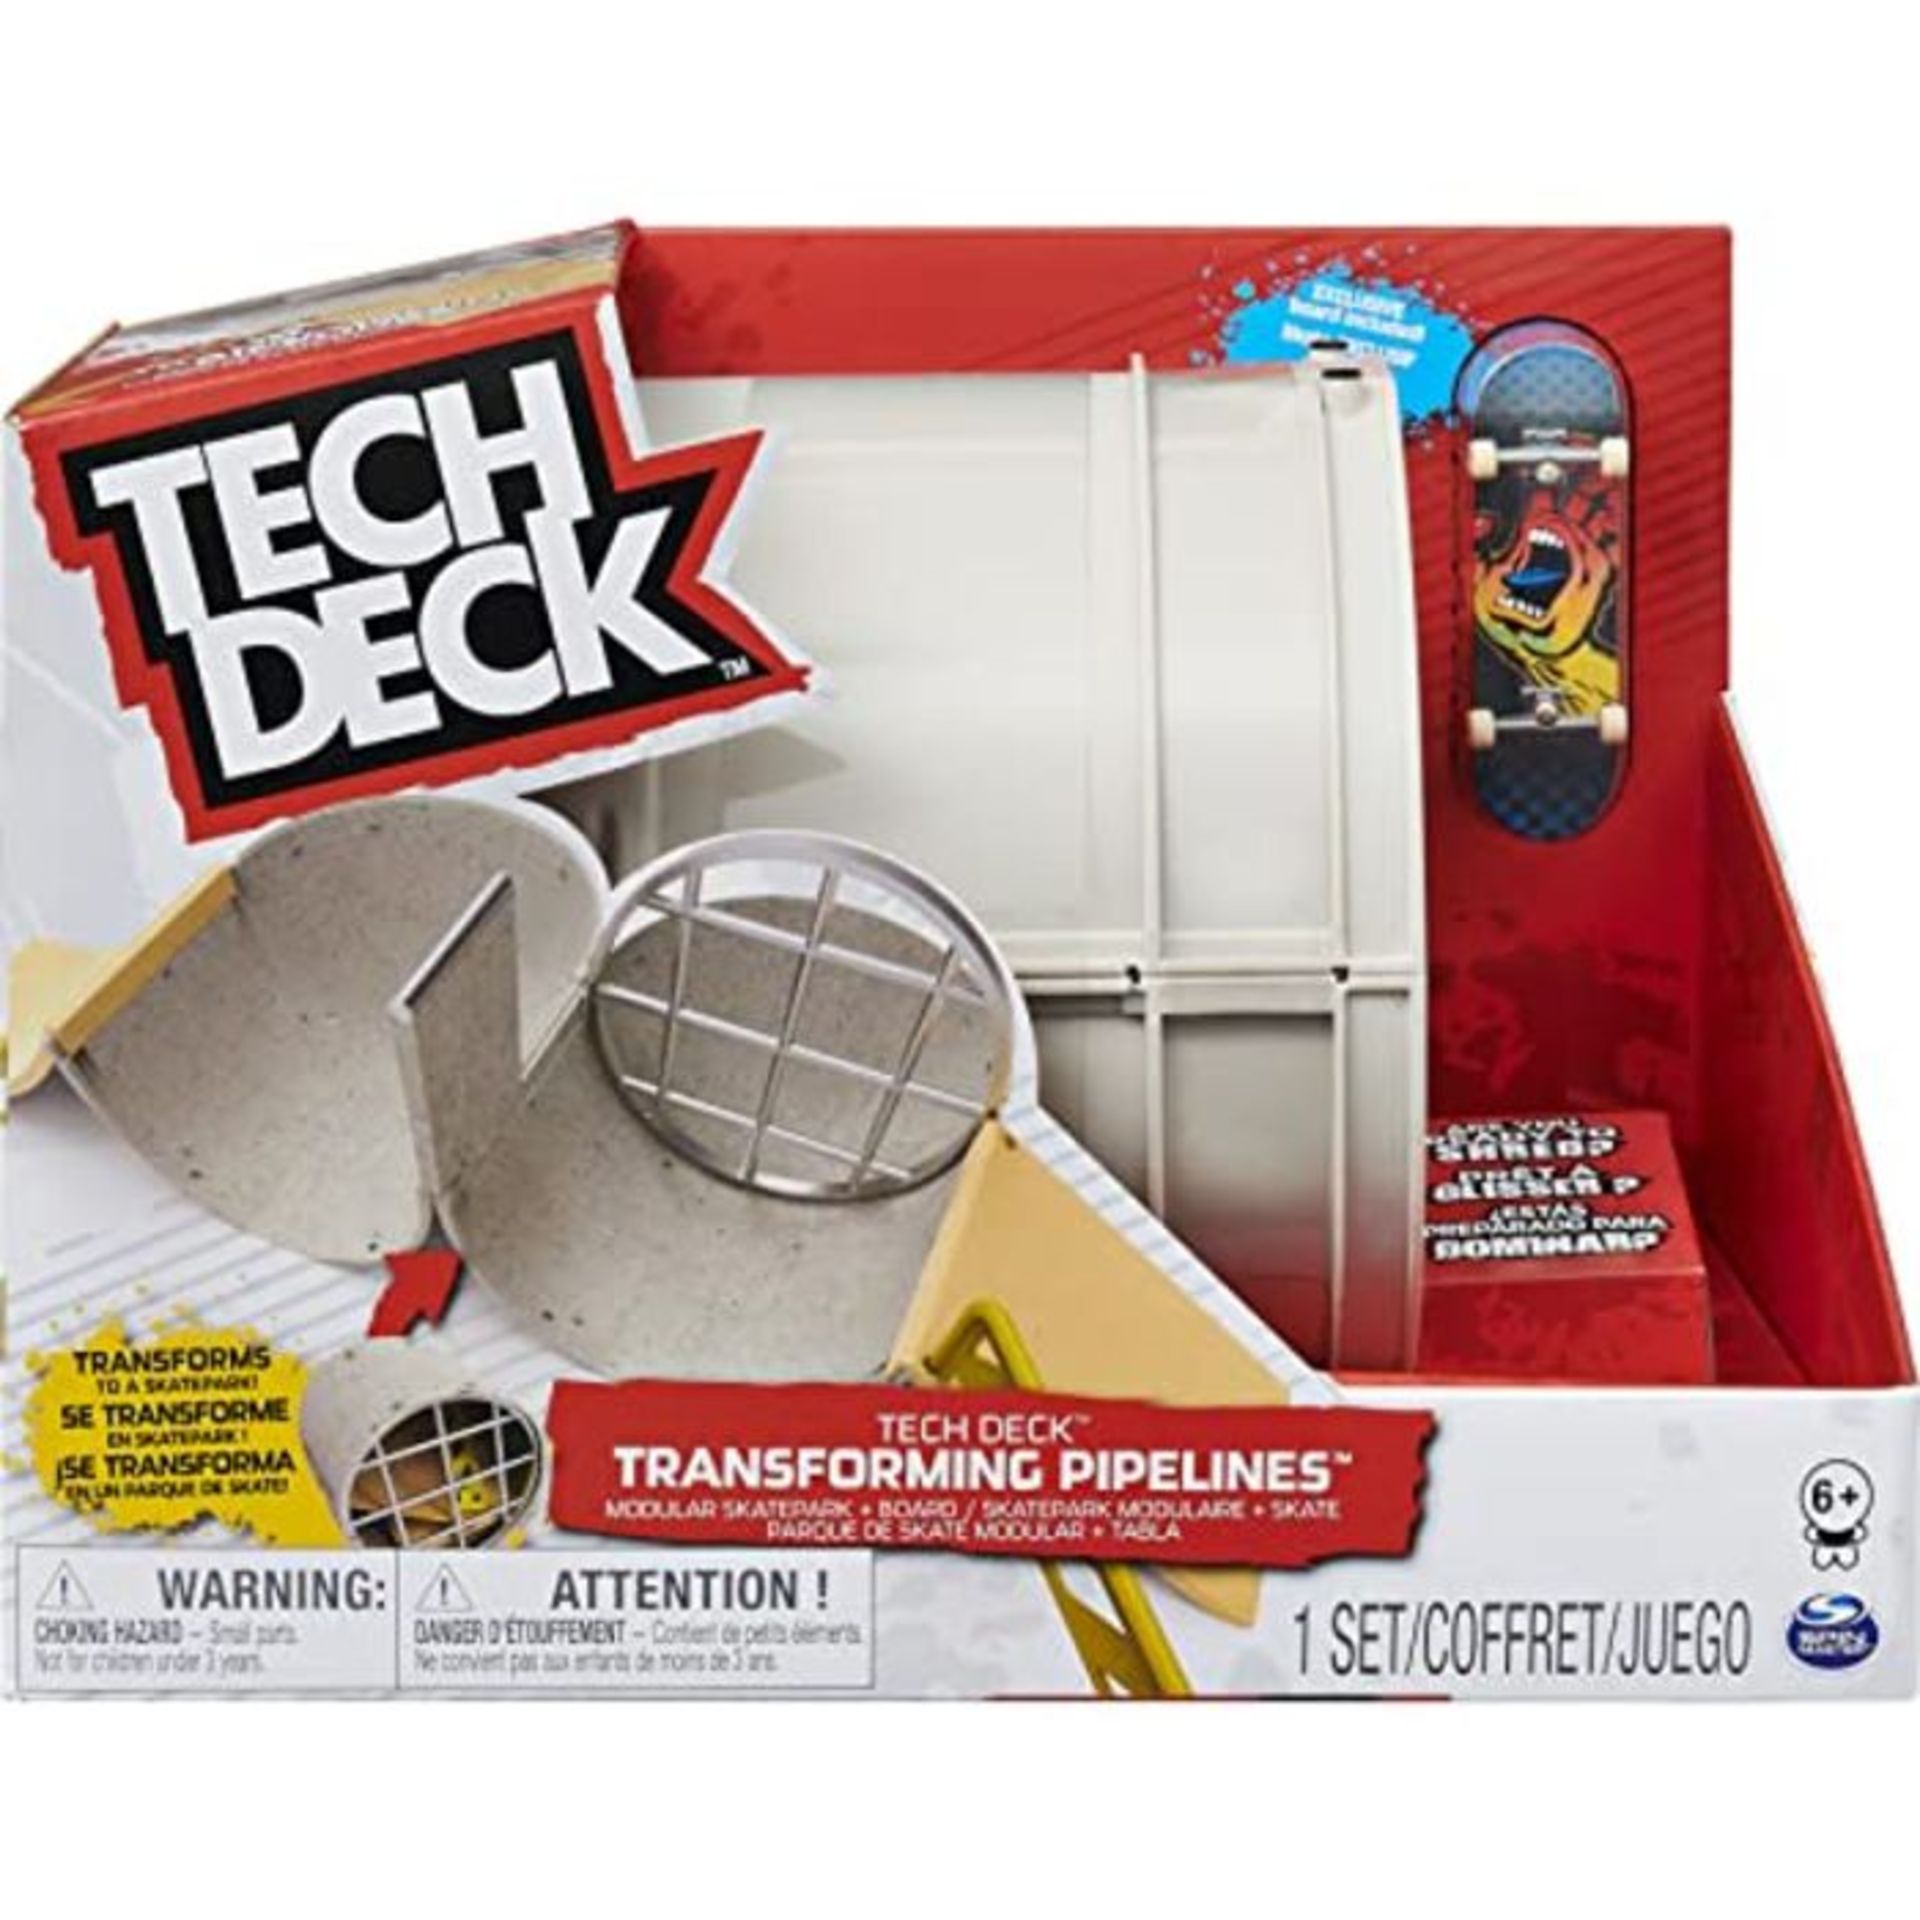 Tech Deck Transforming Pipelines, Modular Skatepark Playset and Exclusive Fingerboard